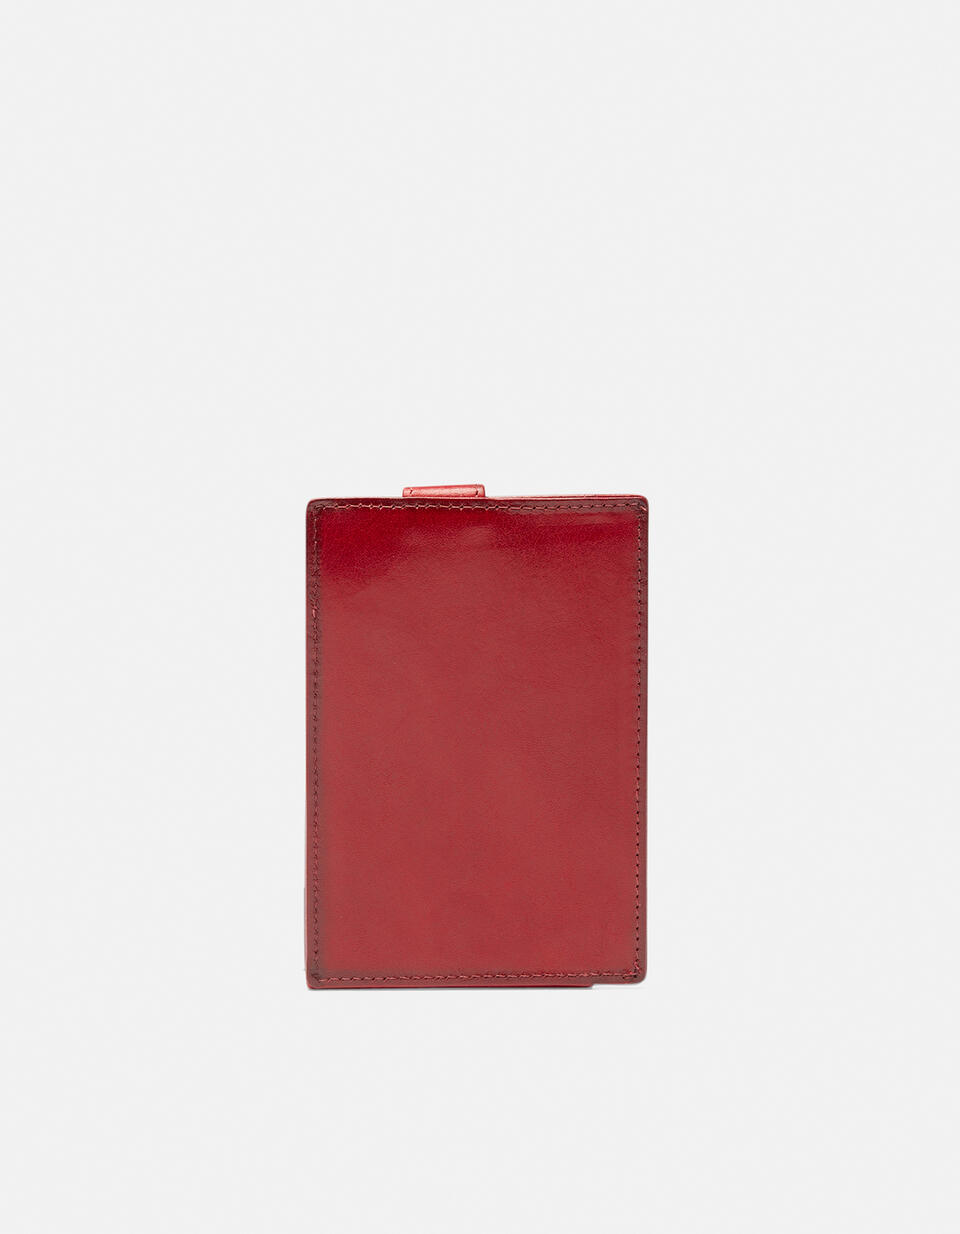 Warm and Color Anti-RFID cardholder - Women's Wallets - Men's Wallets | Wallets Mimì ROSSO - Women's Wallets - Men's Wallets | WalletsCuoieria Fiorentina